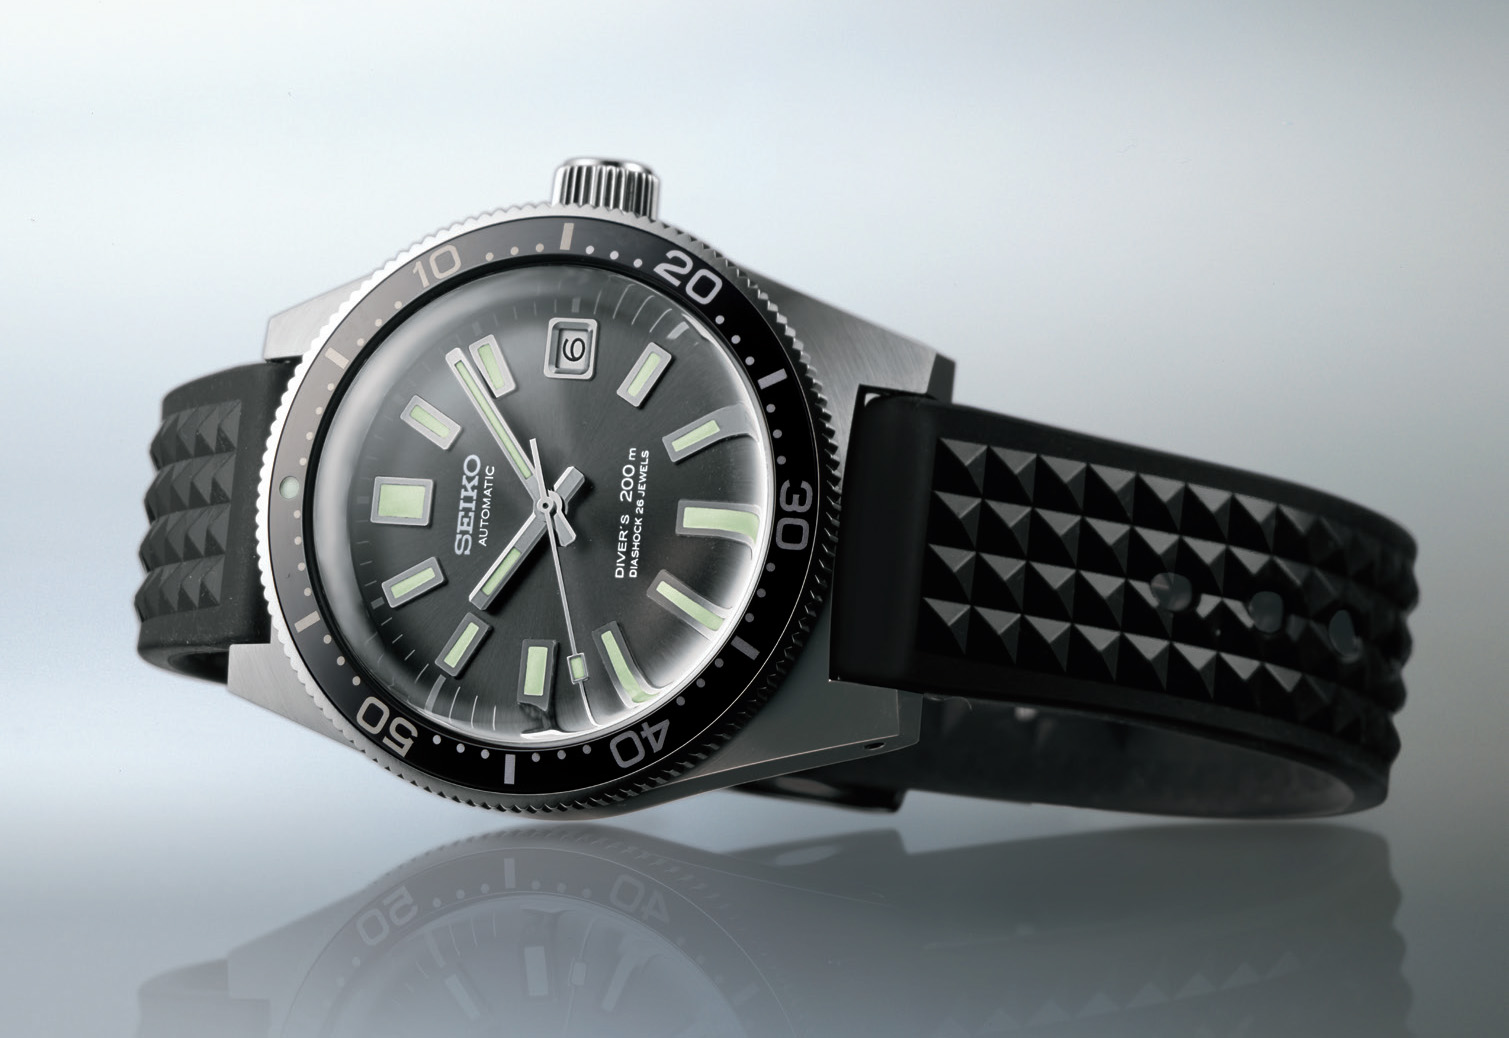 Seiko’s first diver’s watch from 1965 is re-invented in the prospex collection. Sla017